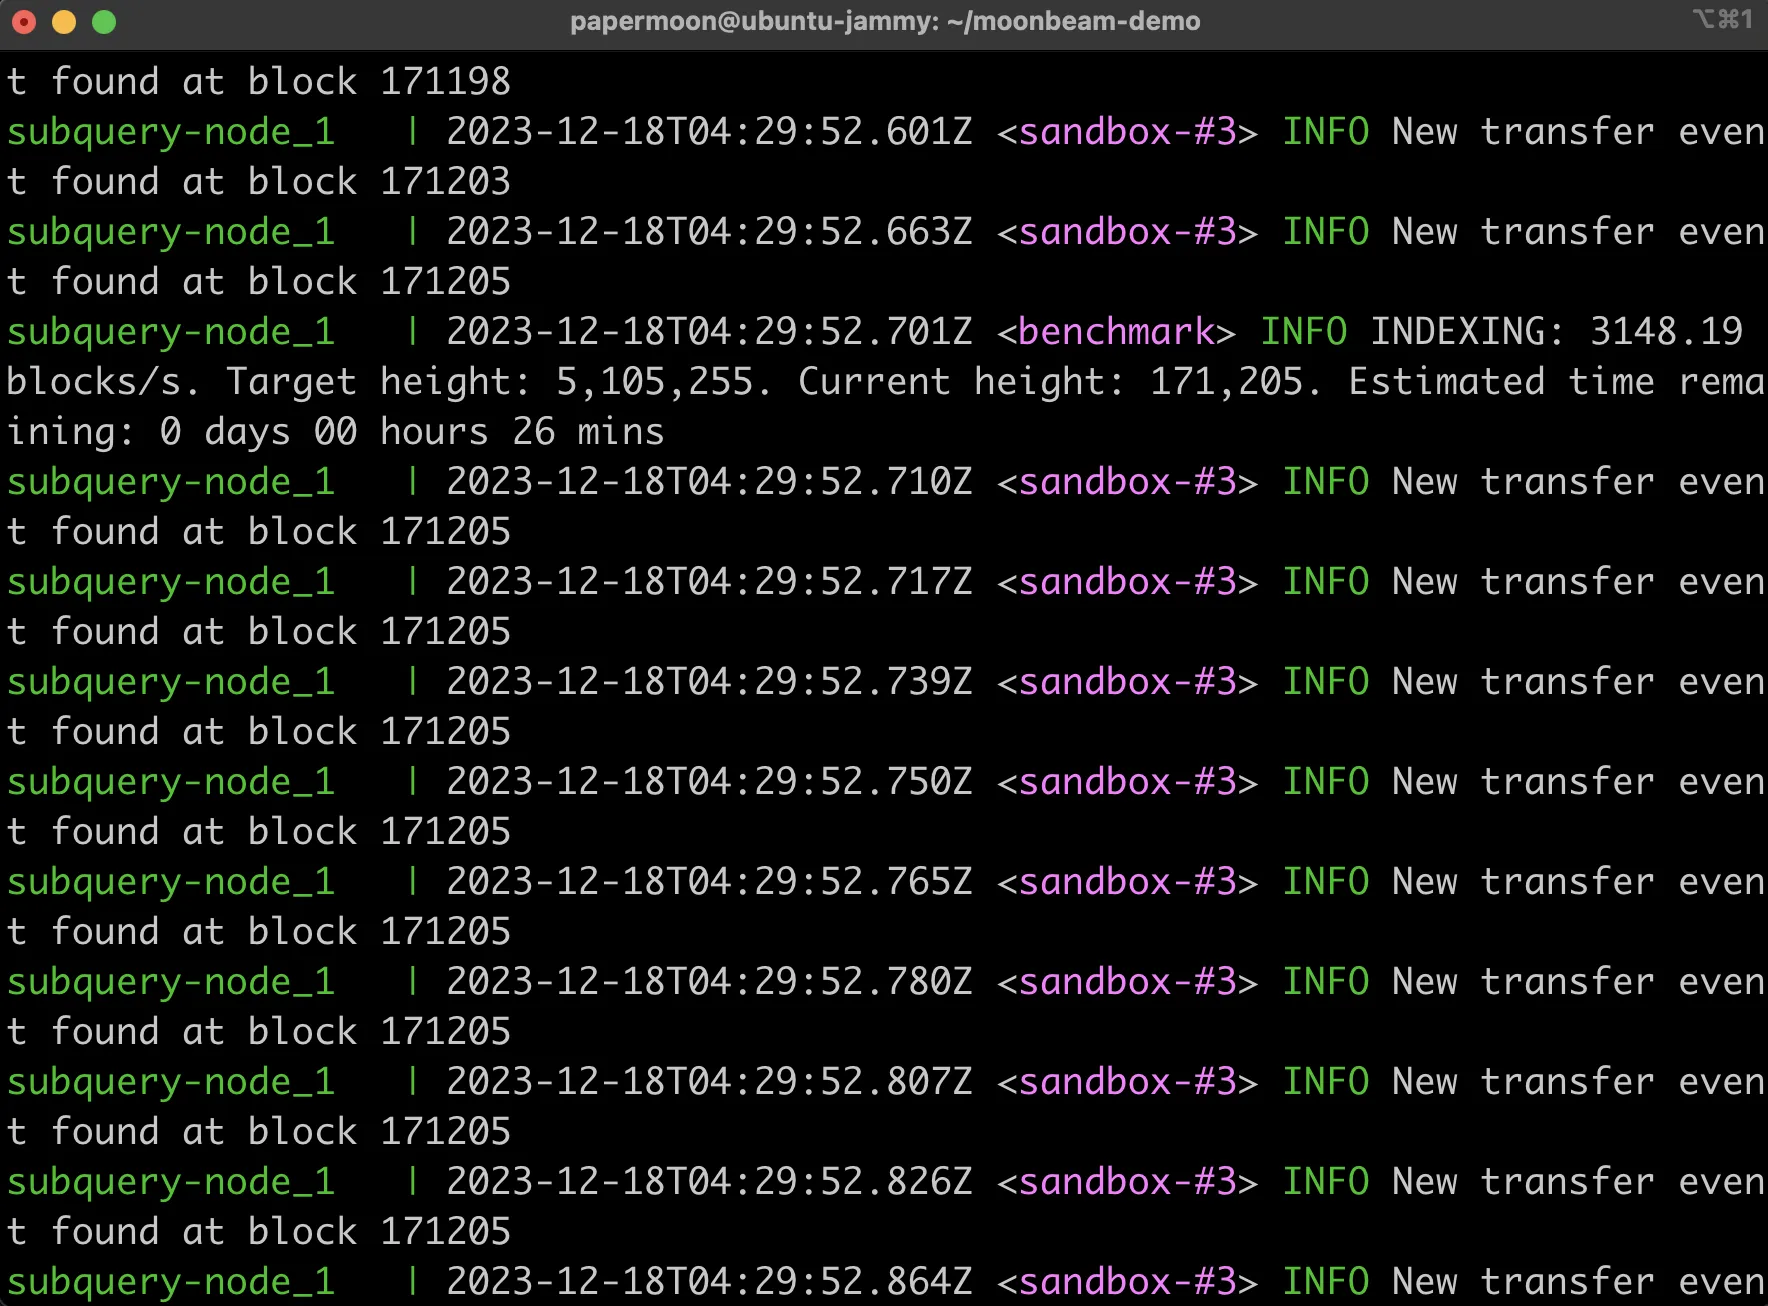 The terminal output after starting up the Docker container for your project.